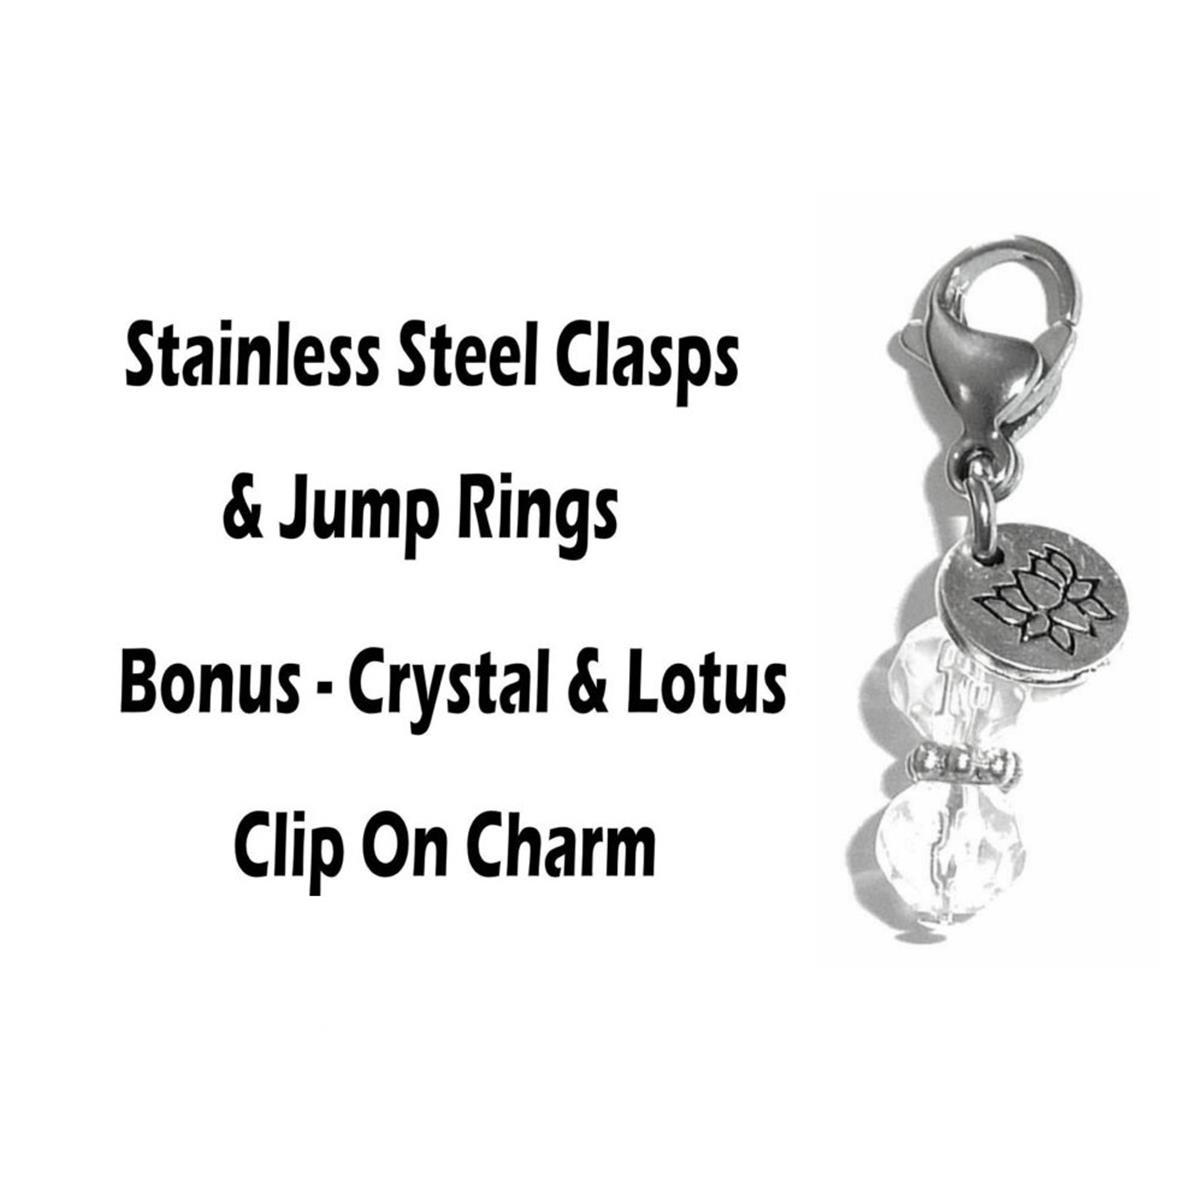 You Are Braver, Stronger, Smarter Clip On Charms - Inspirational Charms Clip On Anywhere